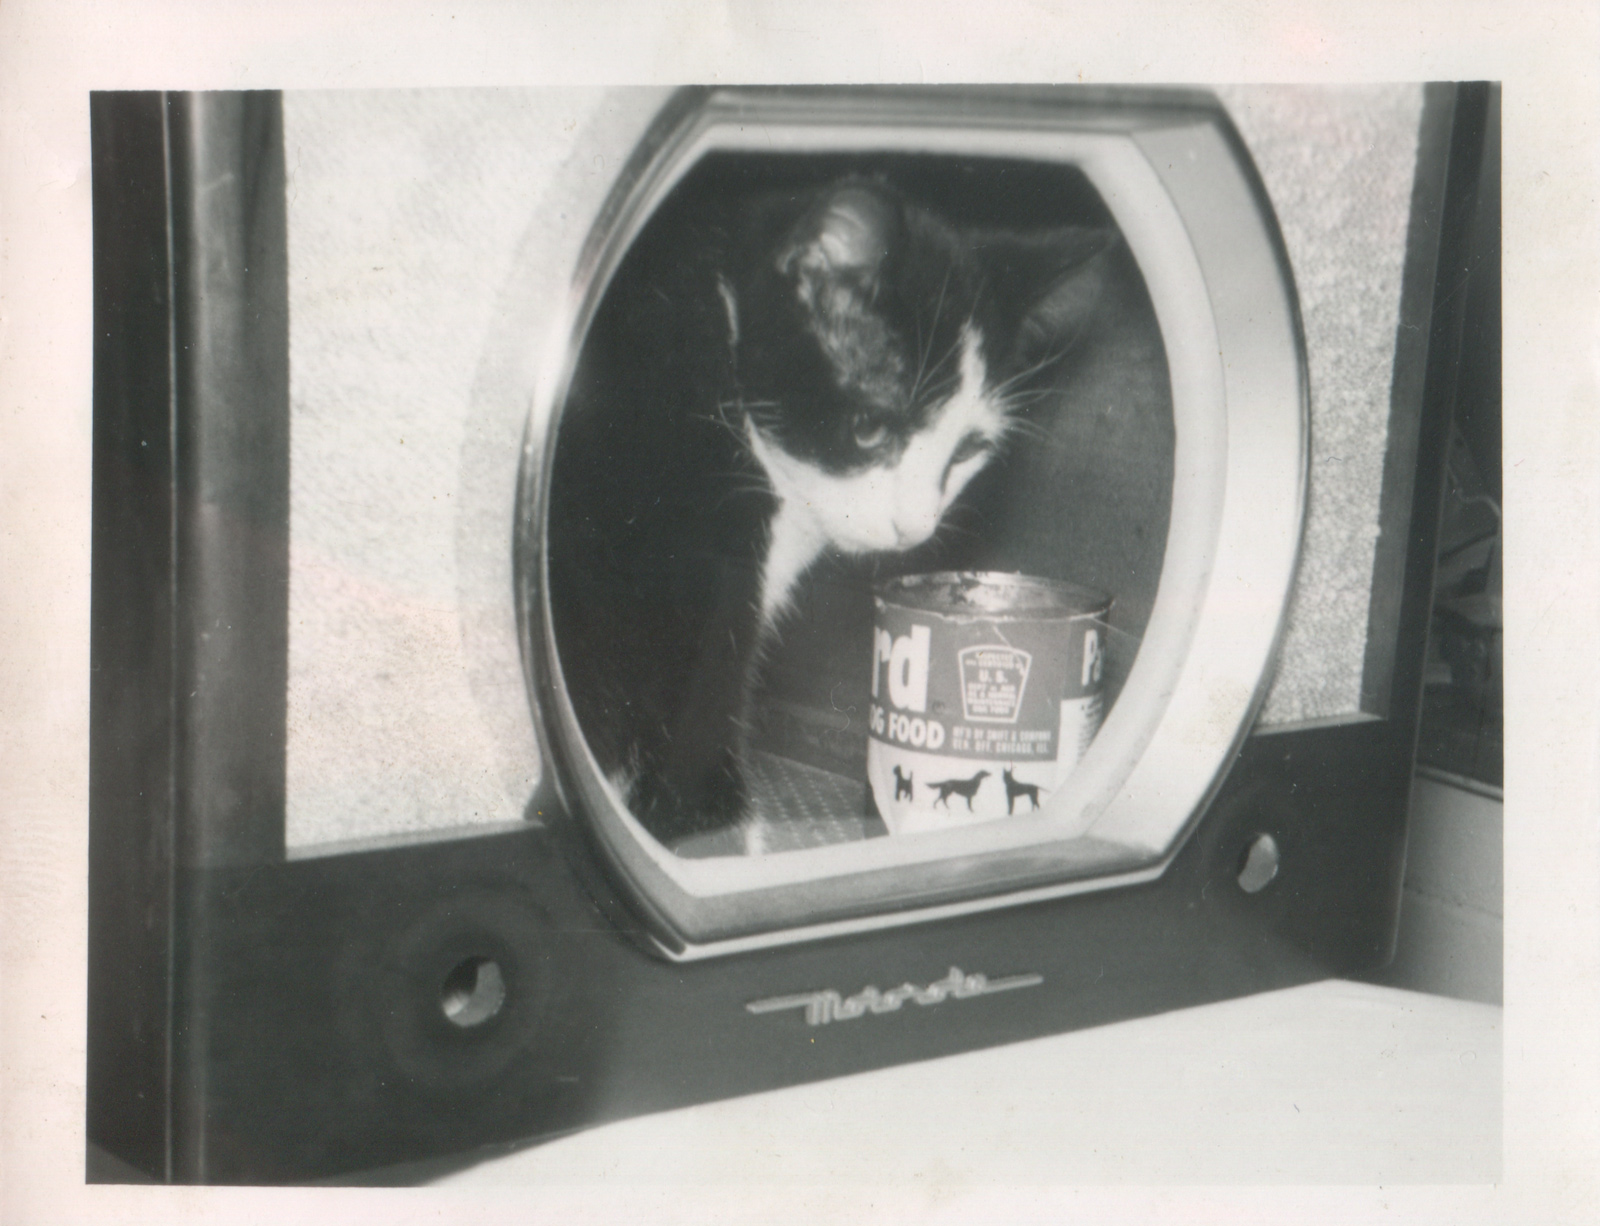 Cat sitting in a hollowed-out TV set